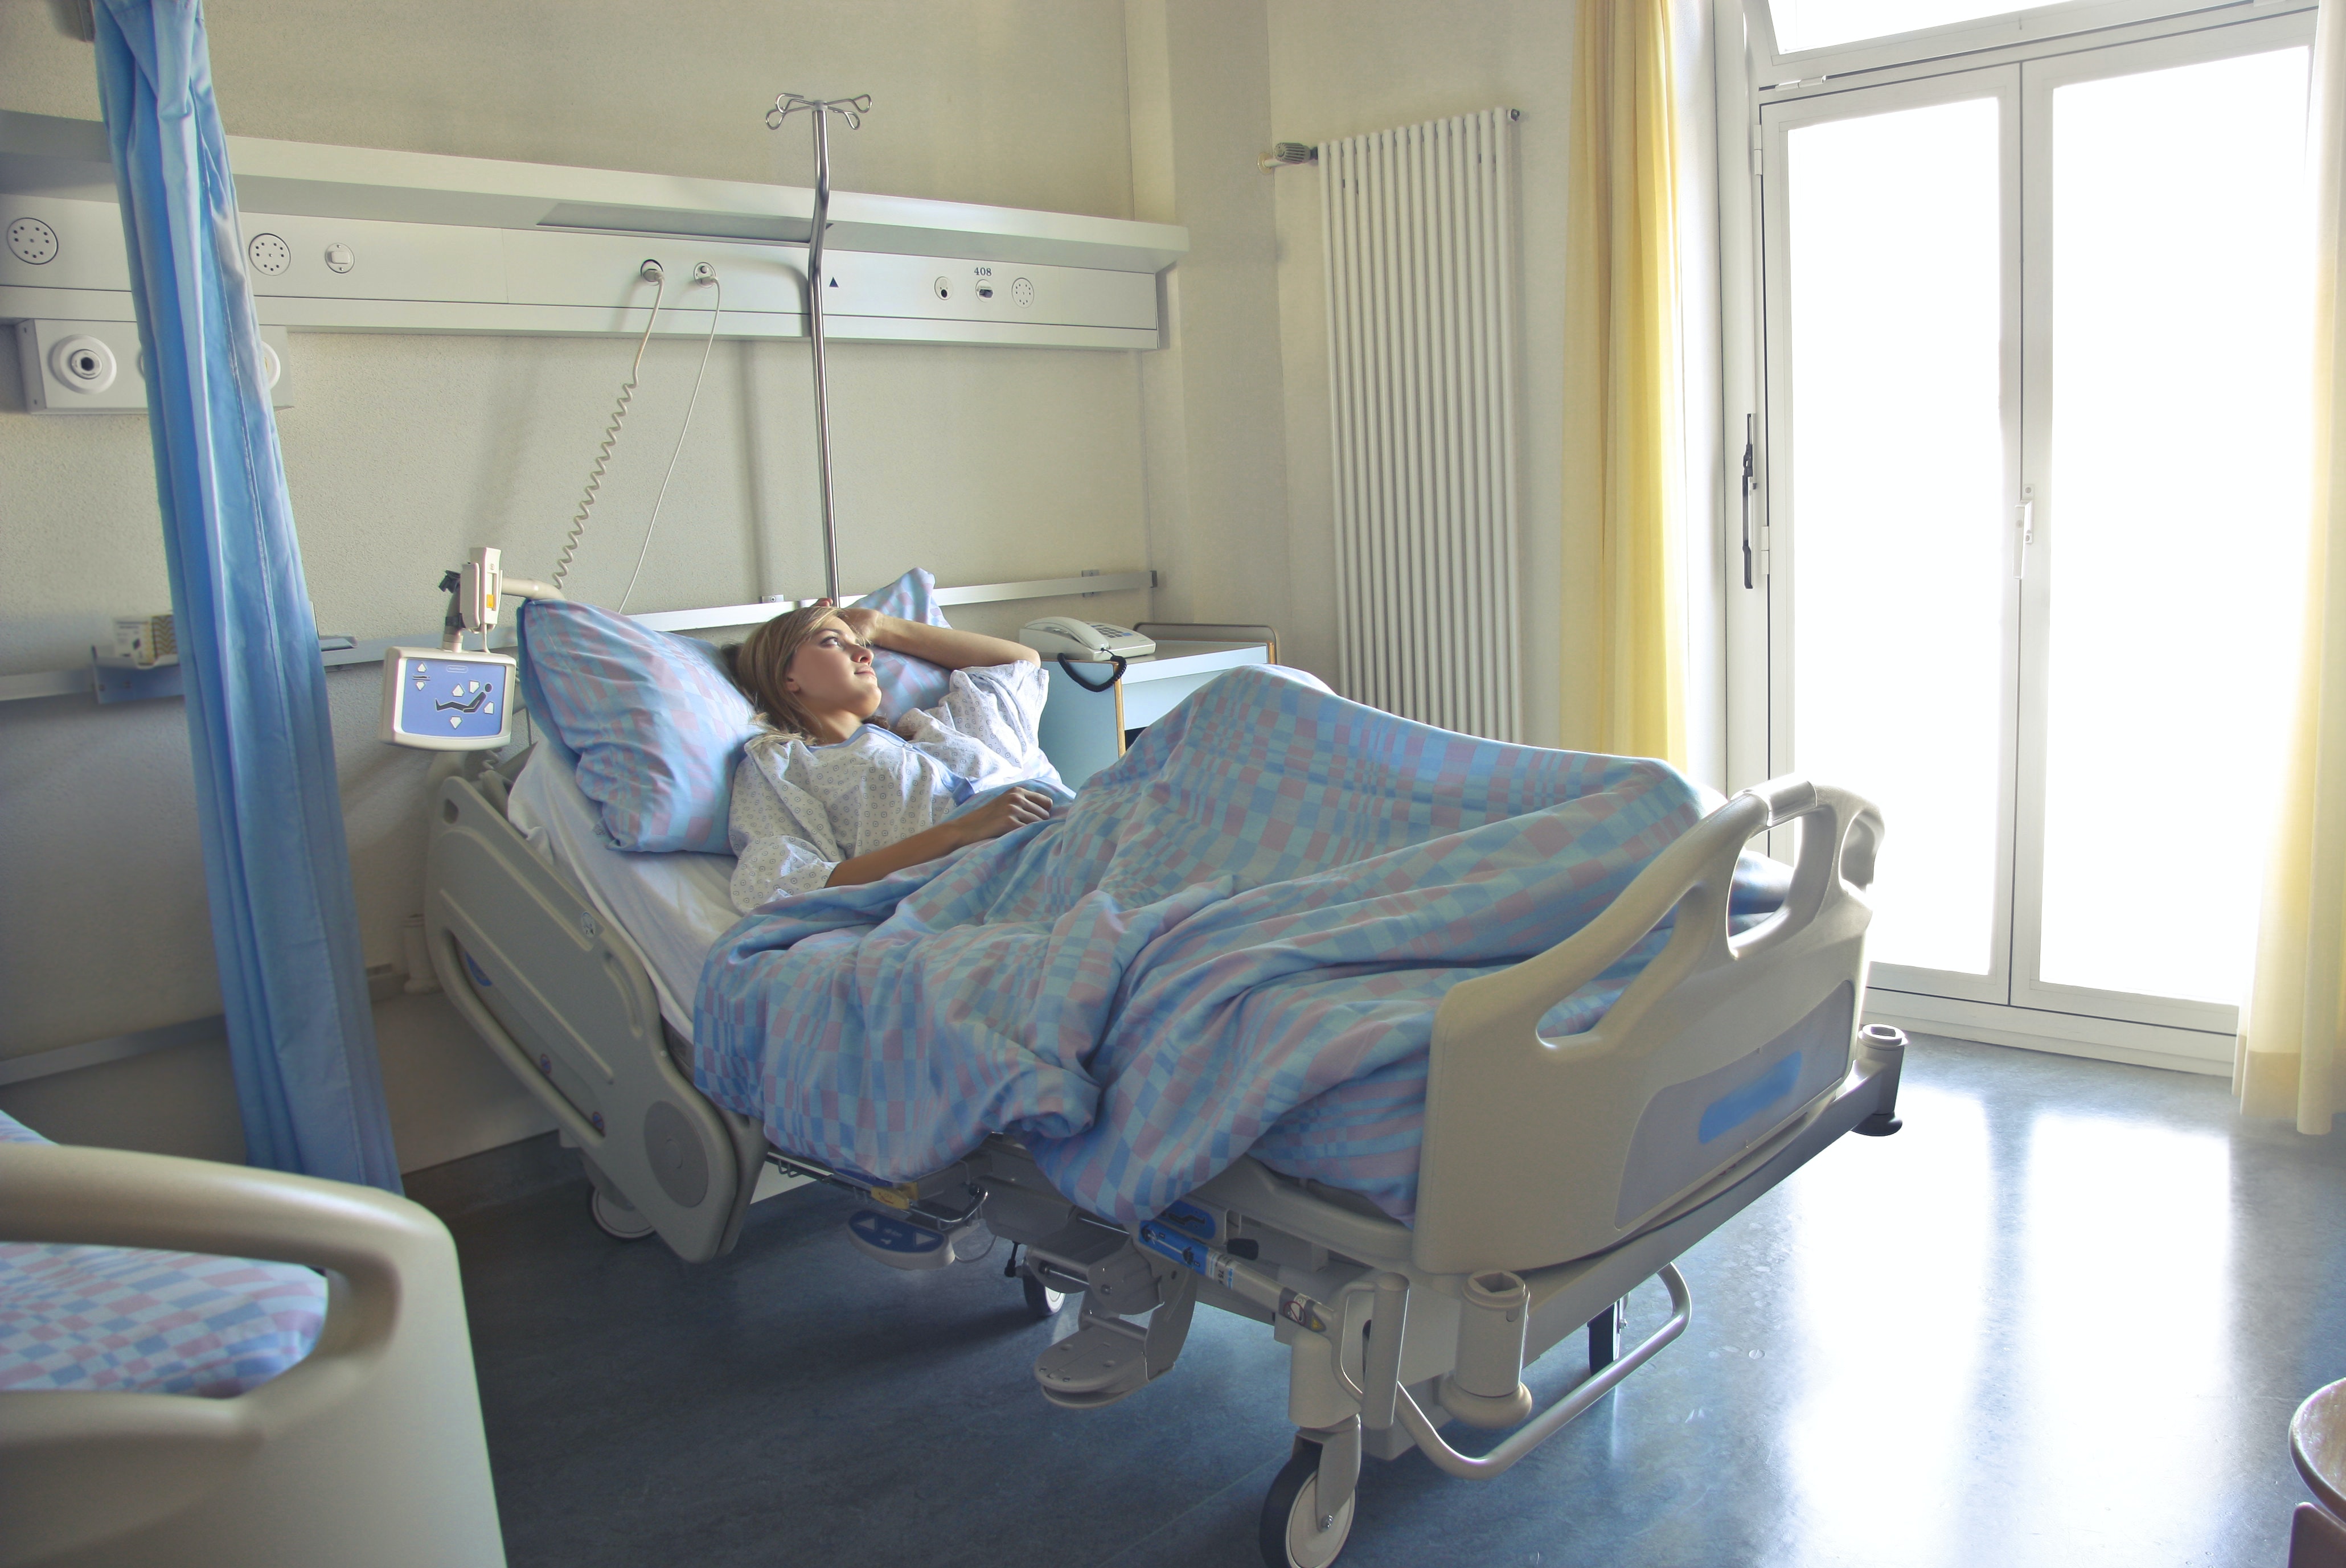 Woman in hospital bed Photo by Andrea Piacquadio from Pexels